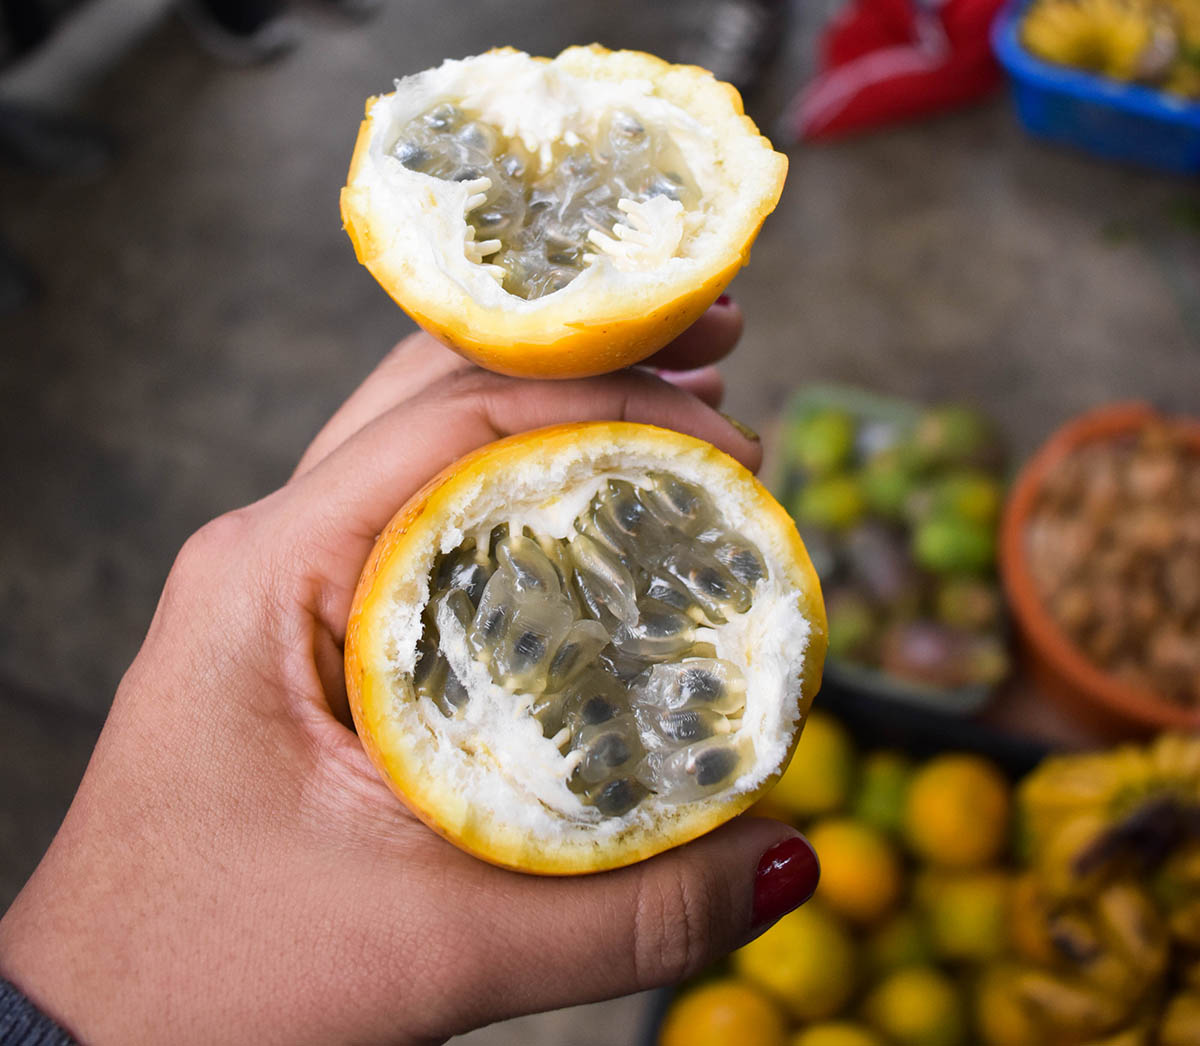 The inside of granadilla, a fruit similar to passionfruit found in Peru.